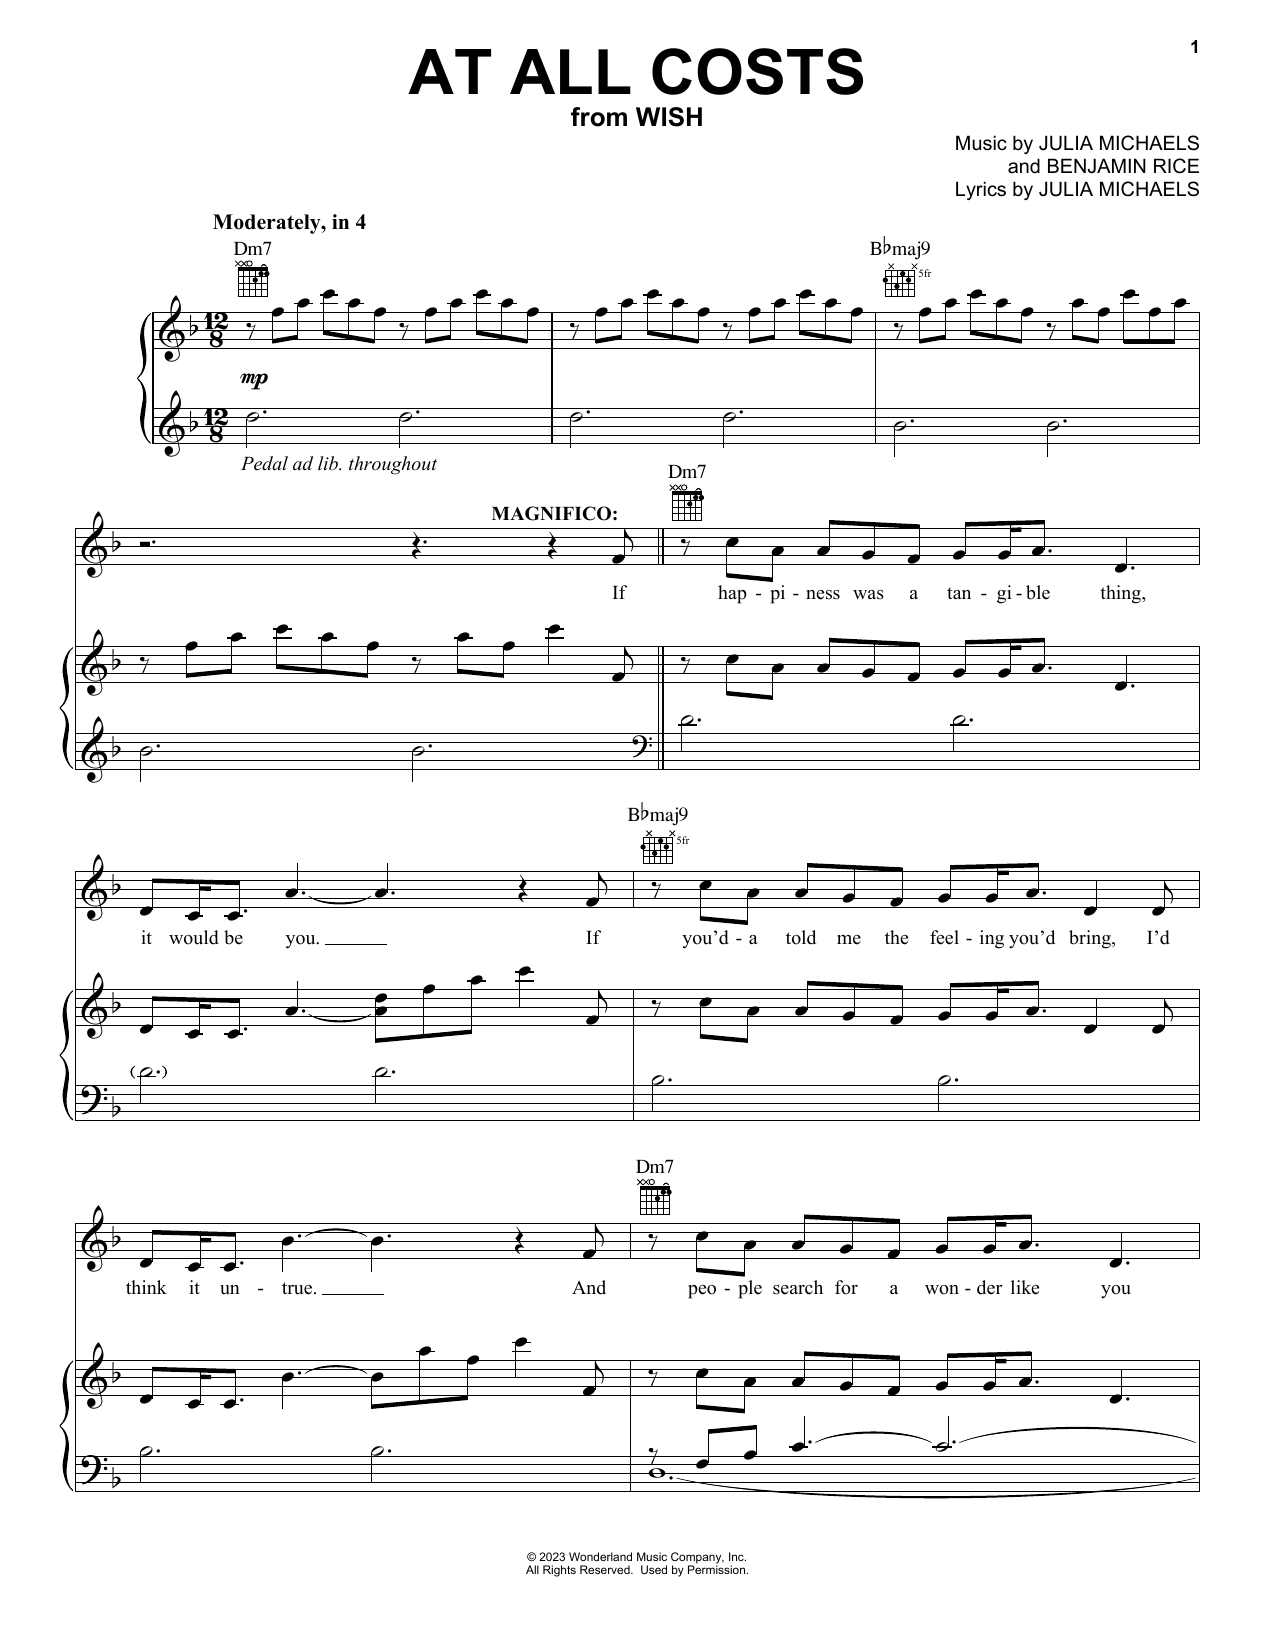 Chris Pine and Ariana DeBose At All Costs (from Wish) sheet music notes printable PDF score